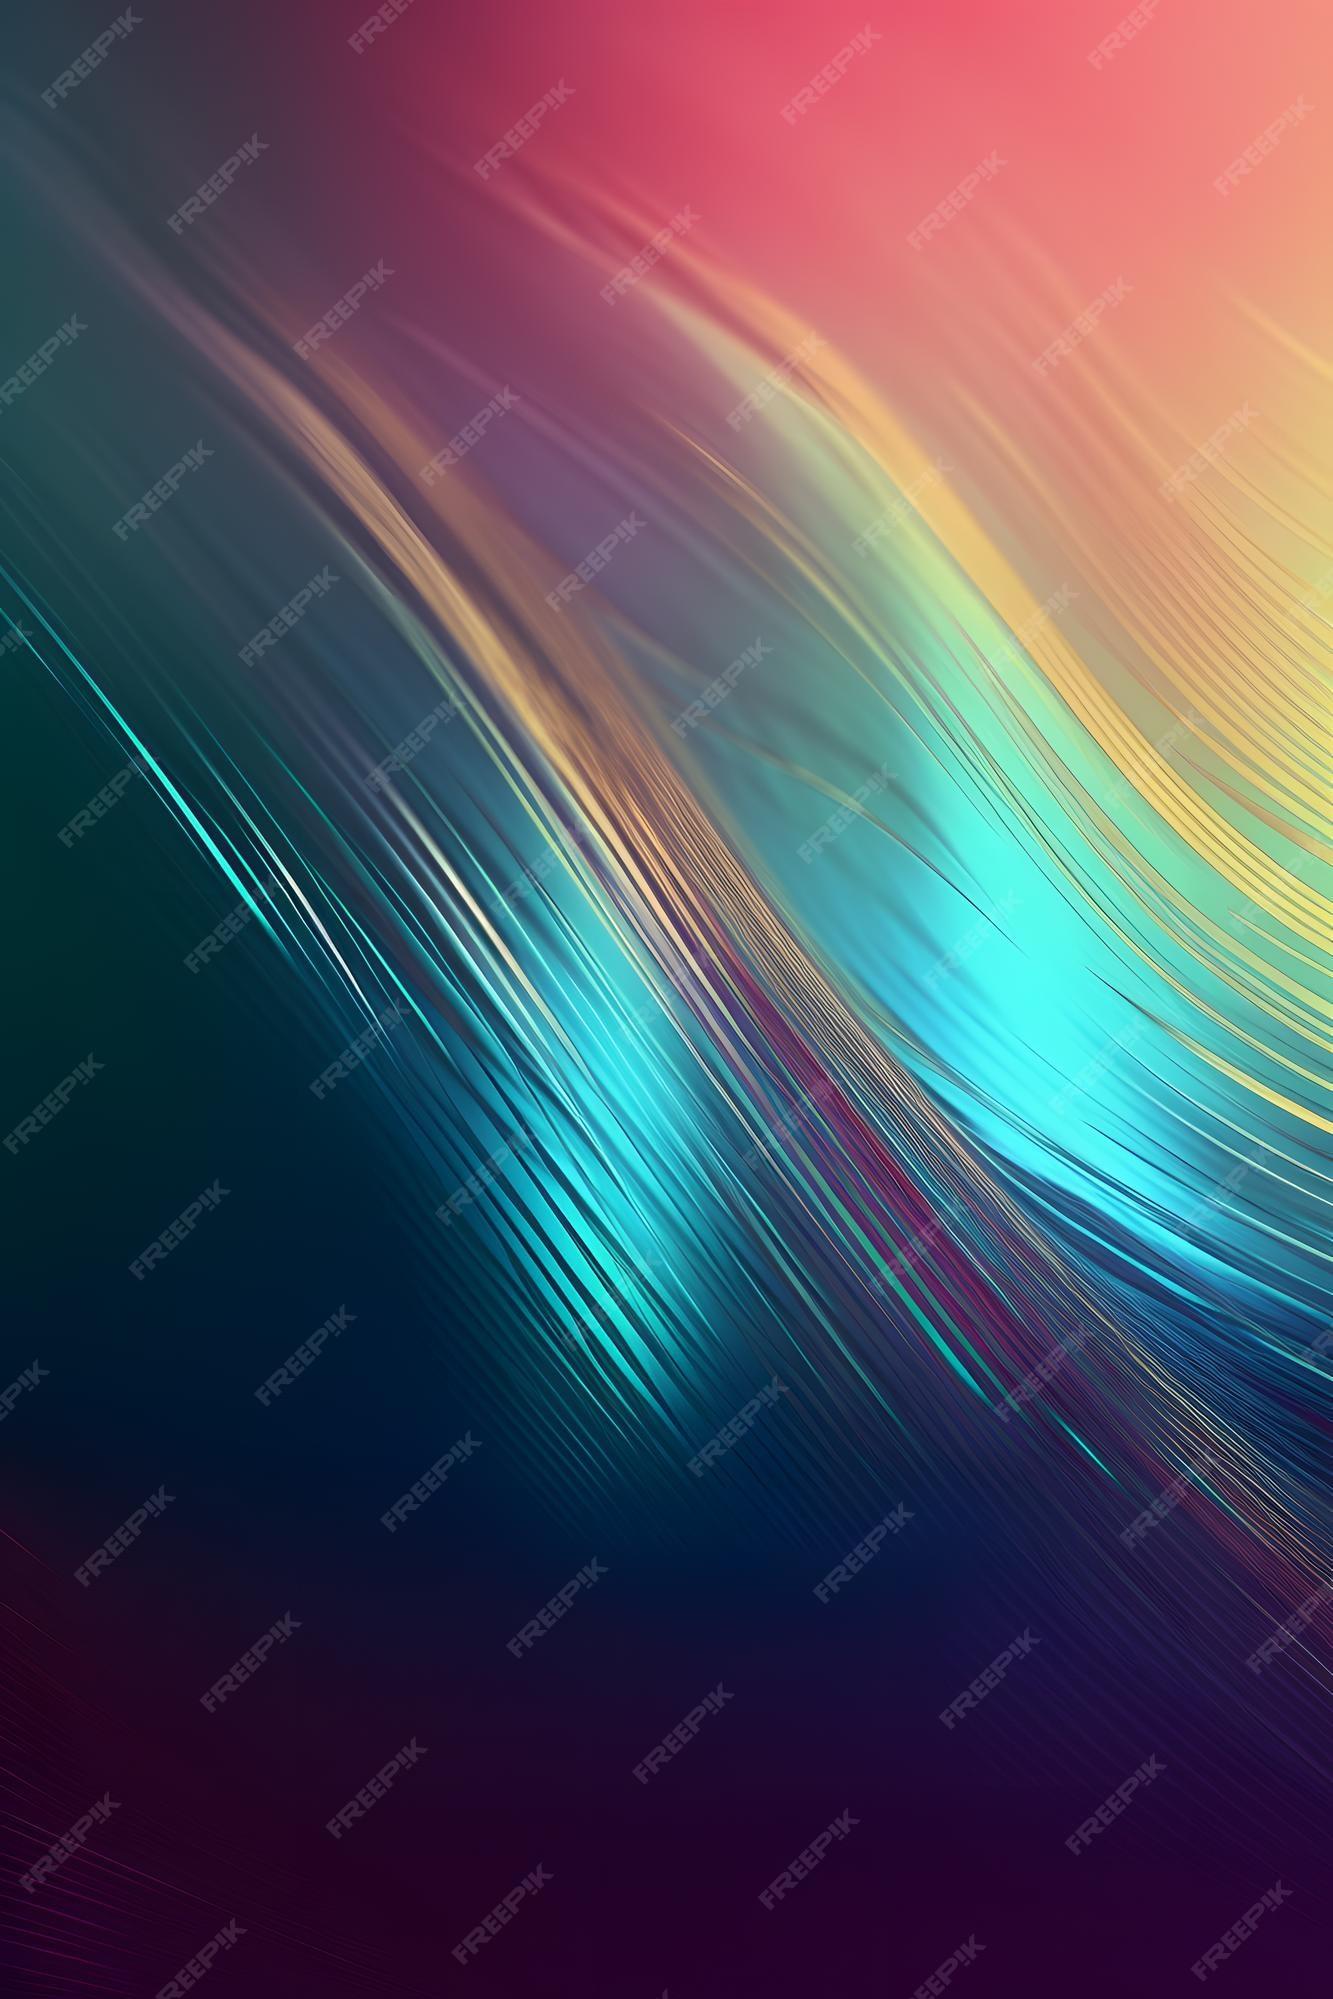 Premium Photo Colorful Abstract Background With A Gradient And